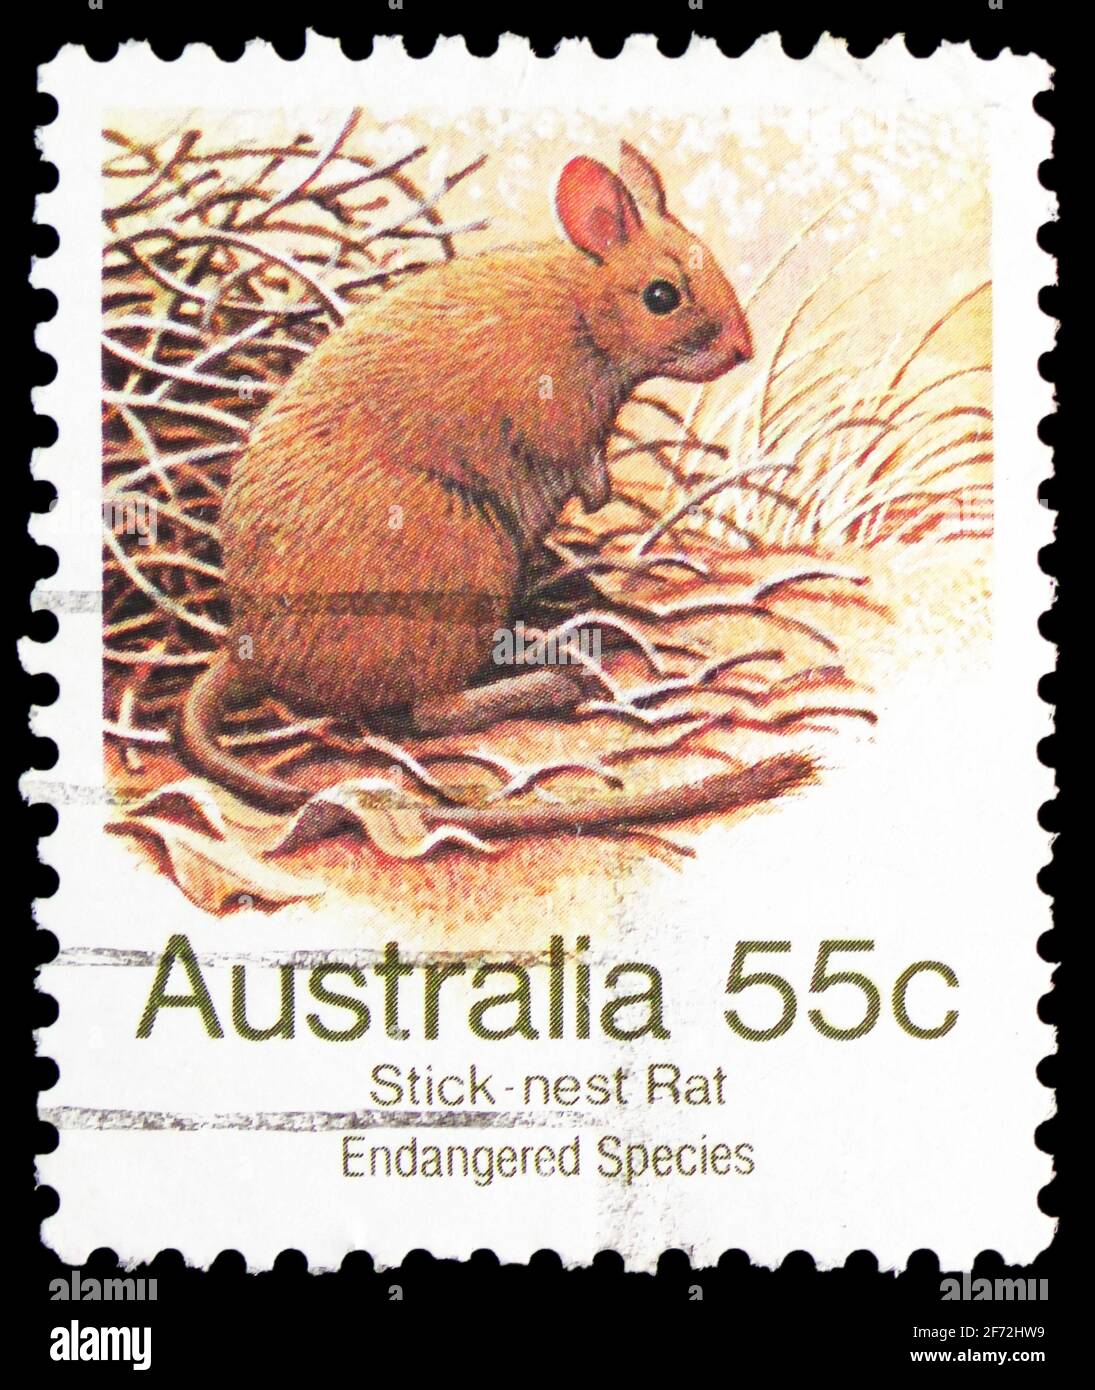 MOSCOW, RUSSIA - DECEMBER 22, 2020: Postage stamp printed in Australia shows Greater Stick-nest Rat (Leporillus conditor), Endangered Species (1981-19 Stock Photo